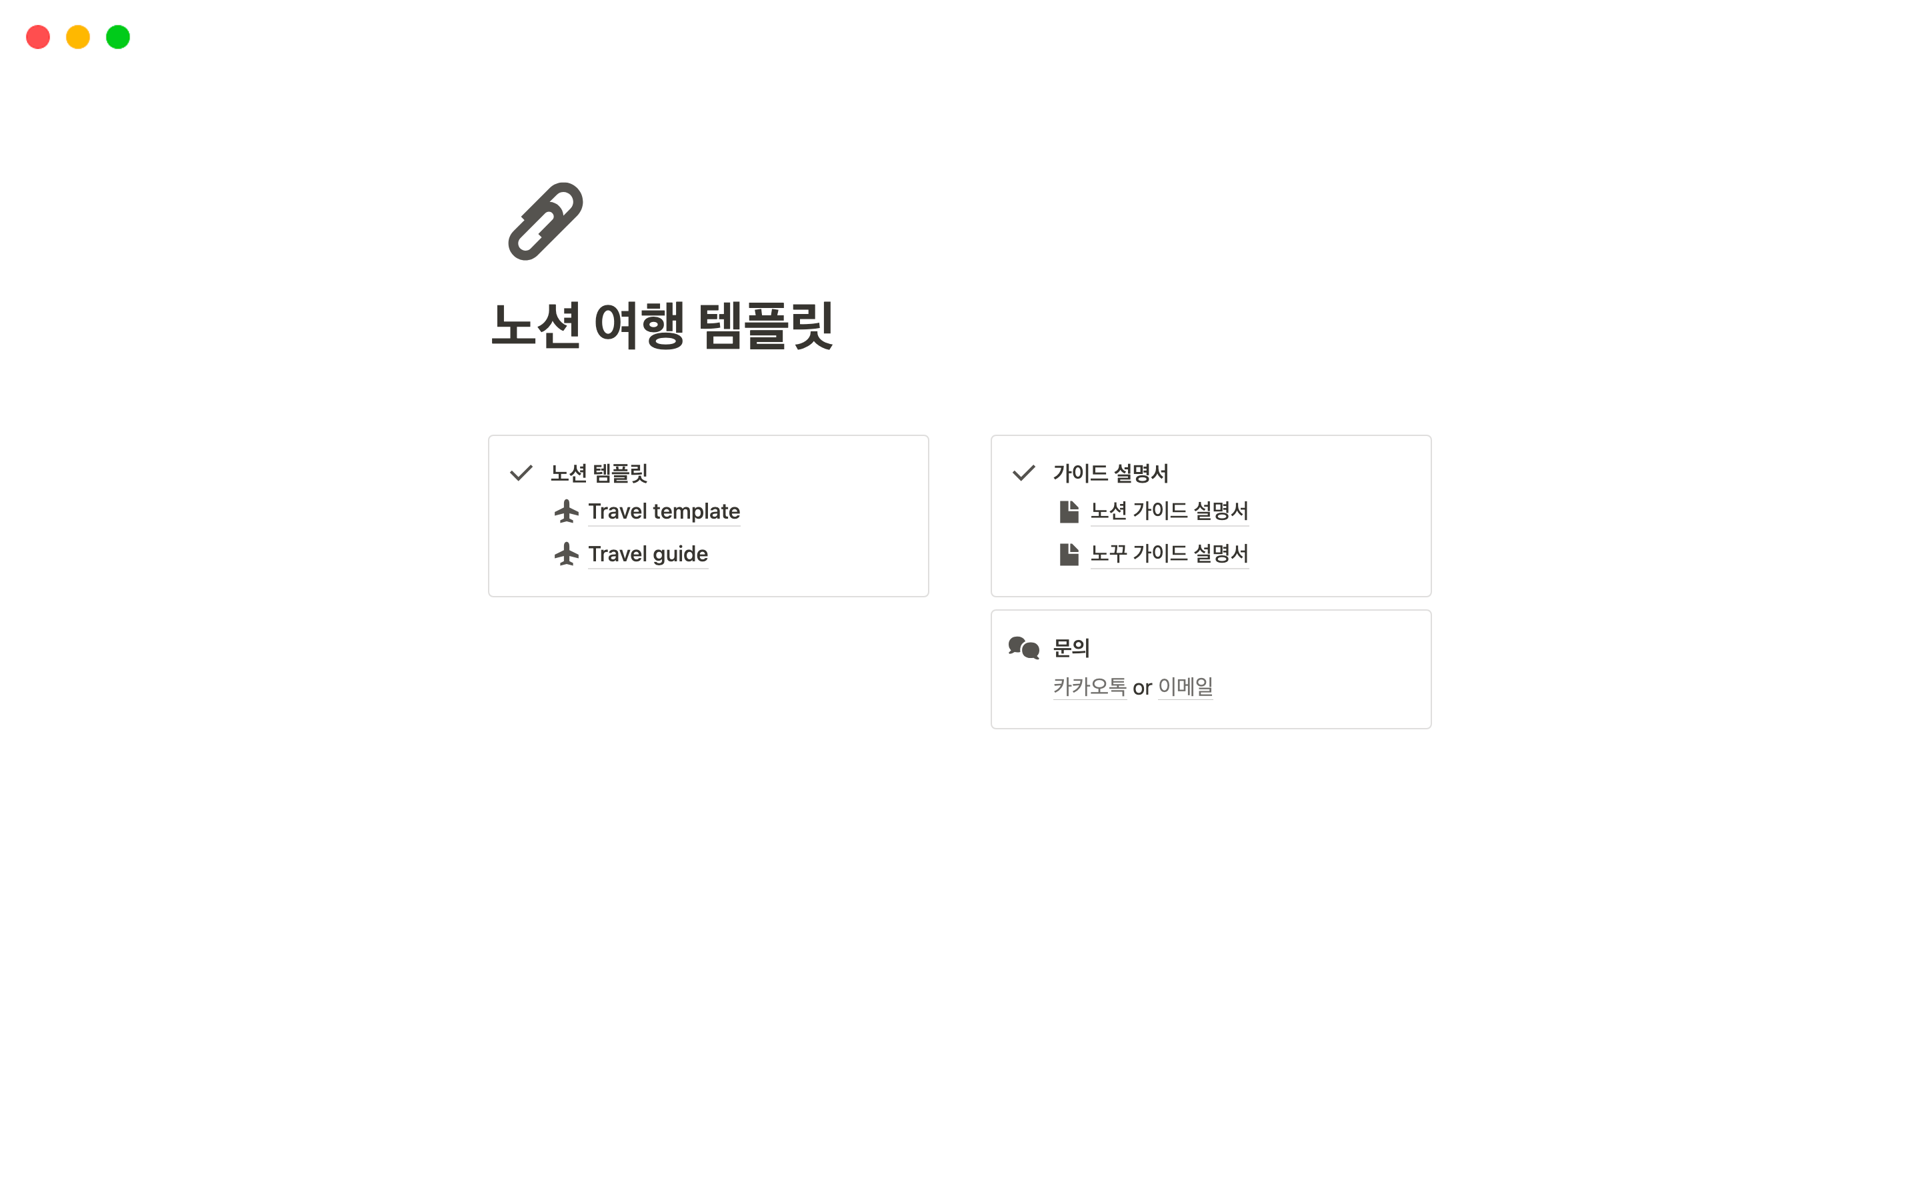 A template preview for 다채로운 청춘을 위한 여행 템플릿